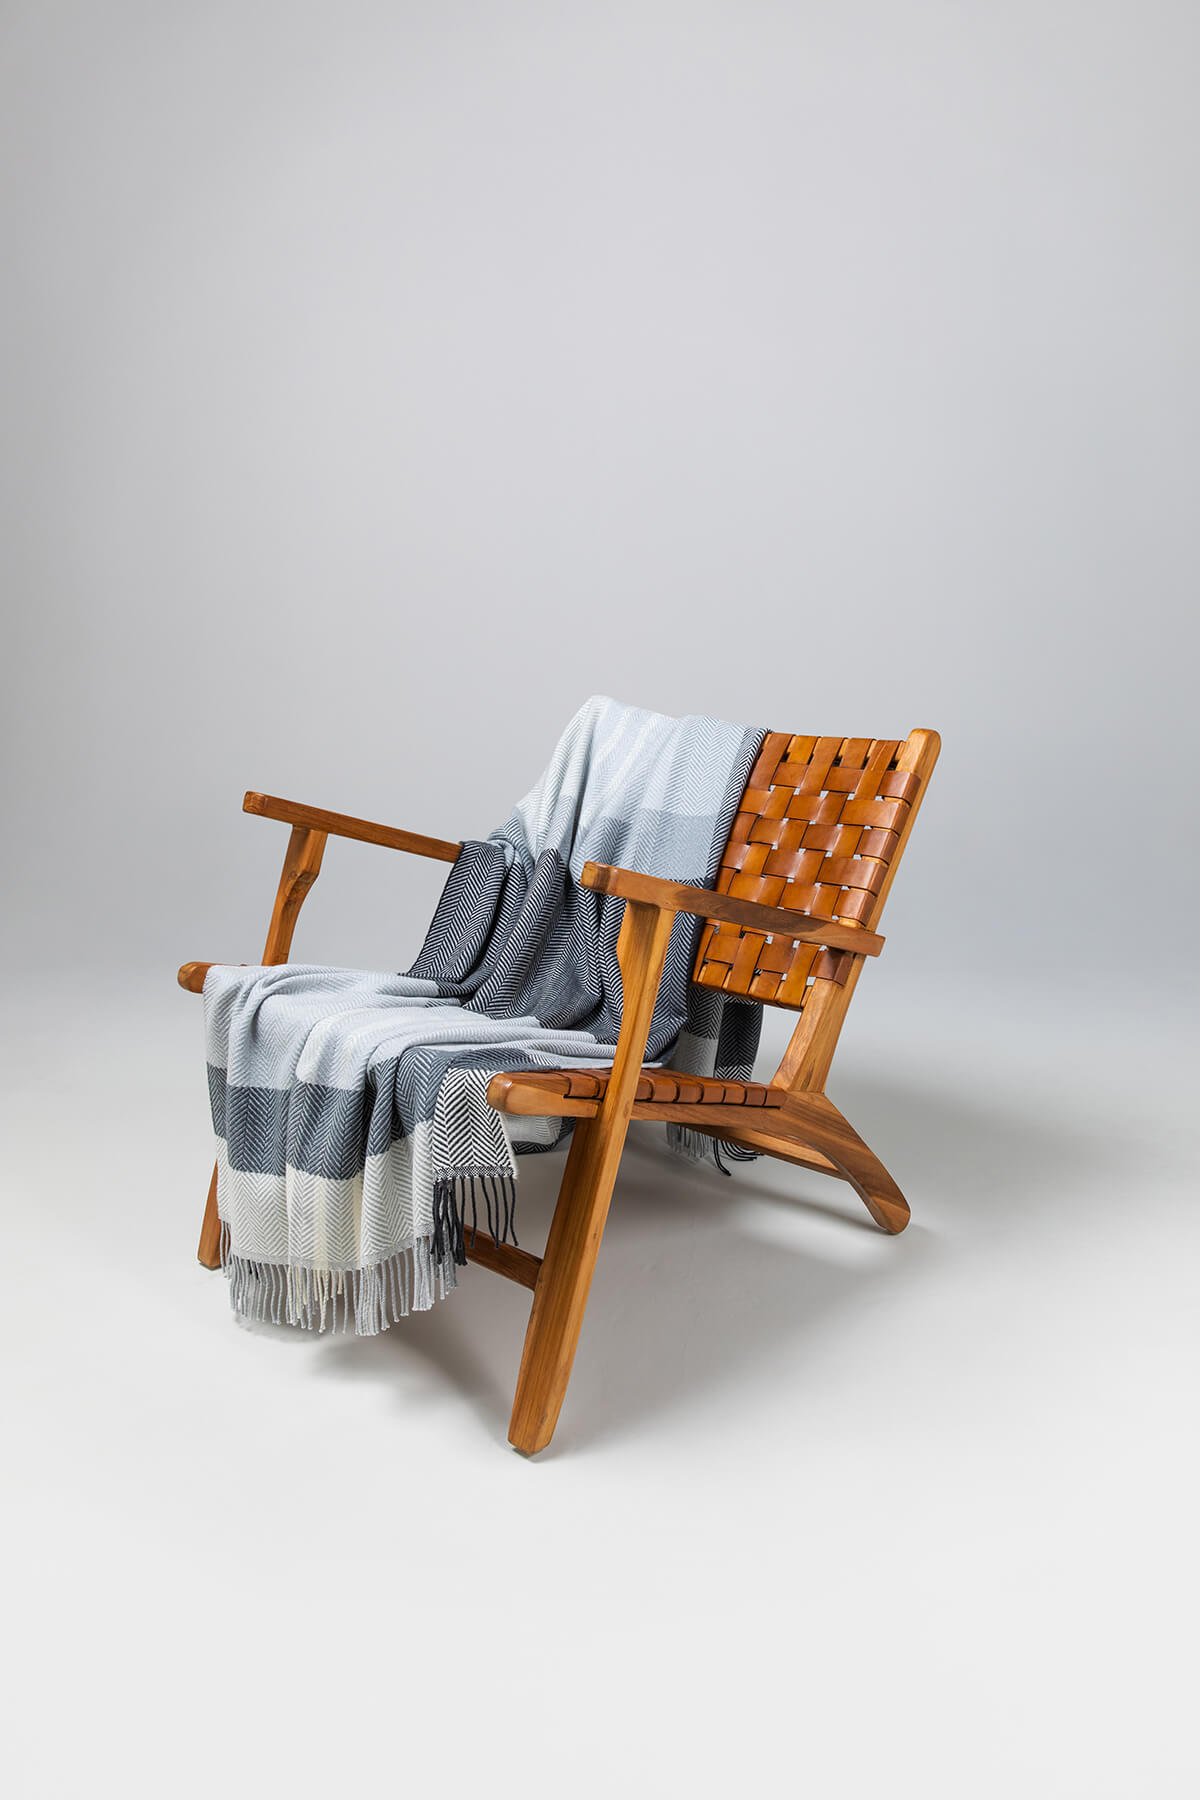 Johnstons of Elgin’s Grey & White Lofty Check Merino Throw on brown chair on a grey background WD001221RU6980ONE